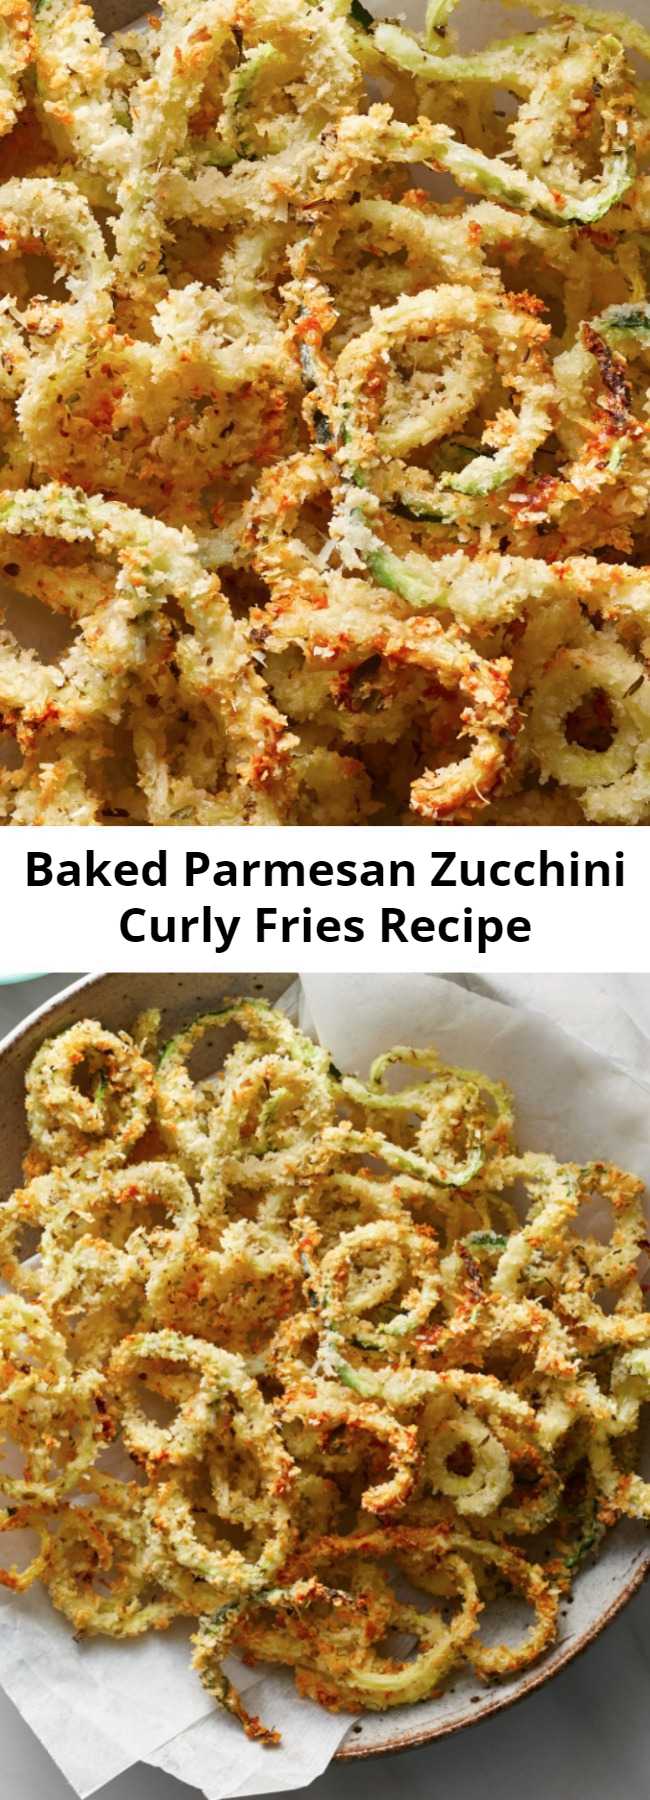 Easy Baked Parmesan Zucchini Curly Fries Recipe - This healthy recipe combines two bar food favorites--fried zucchini and curly fries--into one tempting package. Serve these baked zucchini fries with a simple dipping sauce made with ranch dressing and marinara sauce for a crowd-pleasing appetizer or a side dish for burgers, chicken or pizza. No matter what you serve them with, they're a fun way to eat more vegetables for kids and adults alike. #comfortfood #healthycomfortfood #recipe #healthy